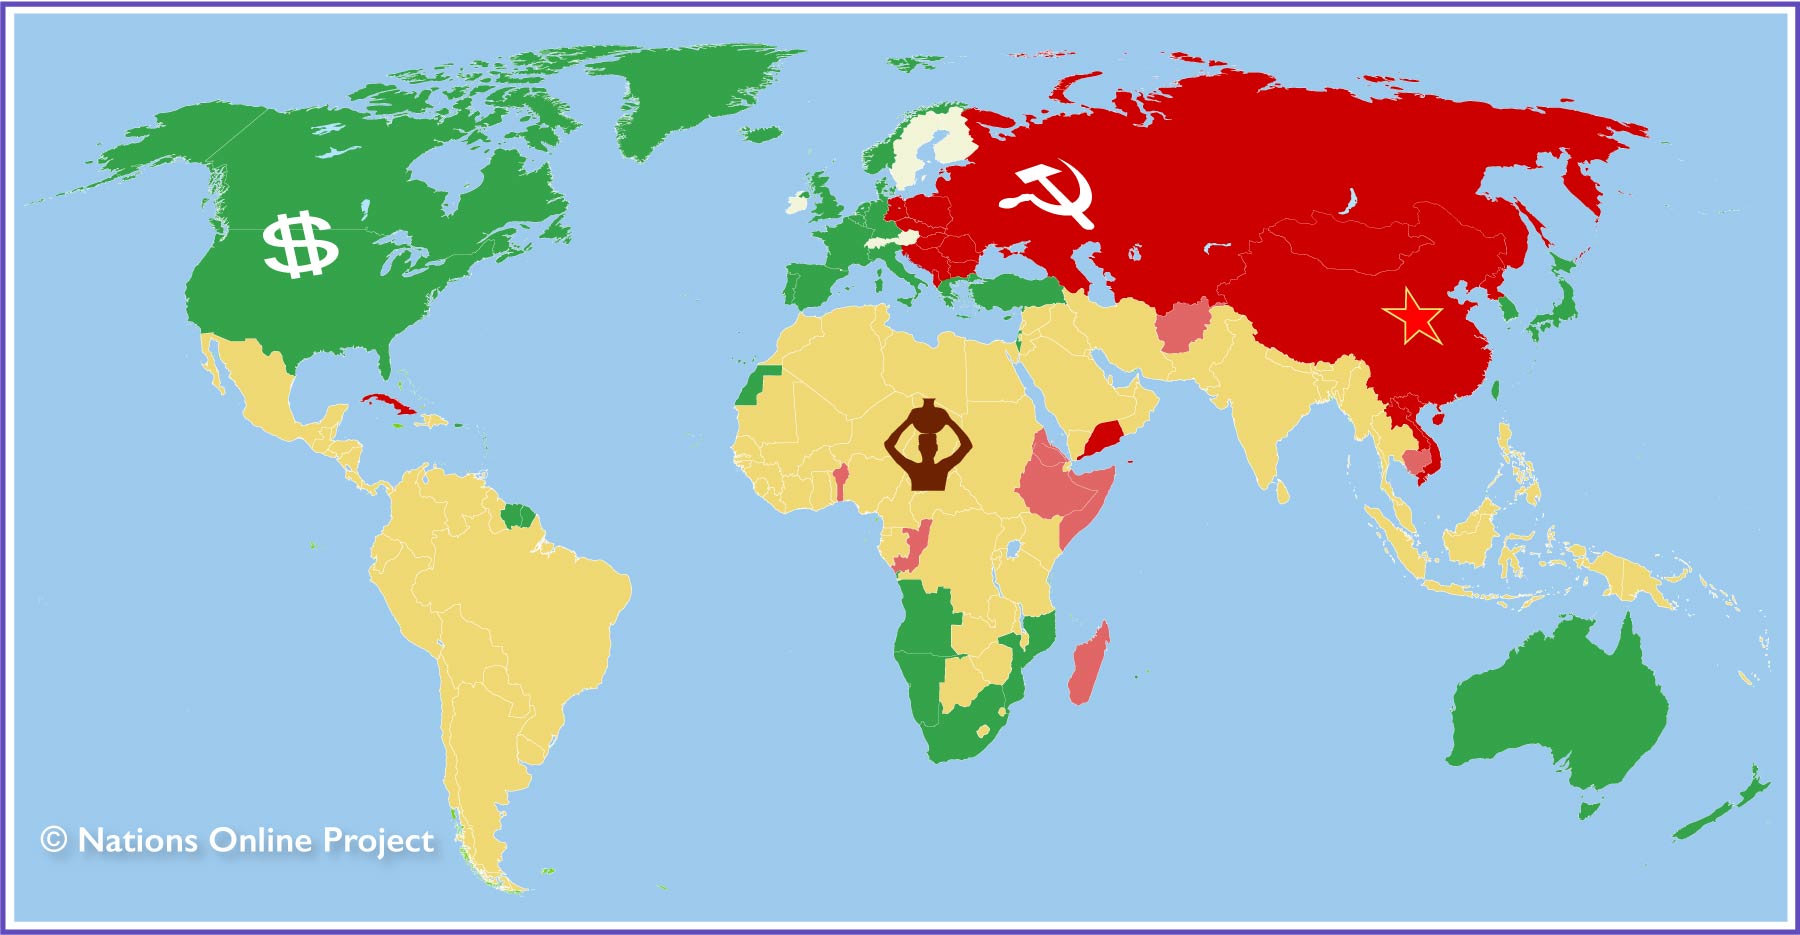 Worldmap with countries of the First, Second, and Third World